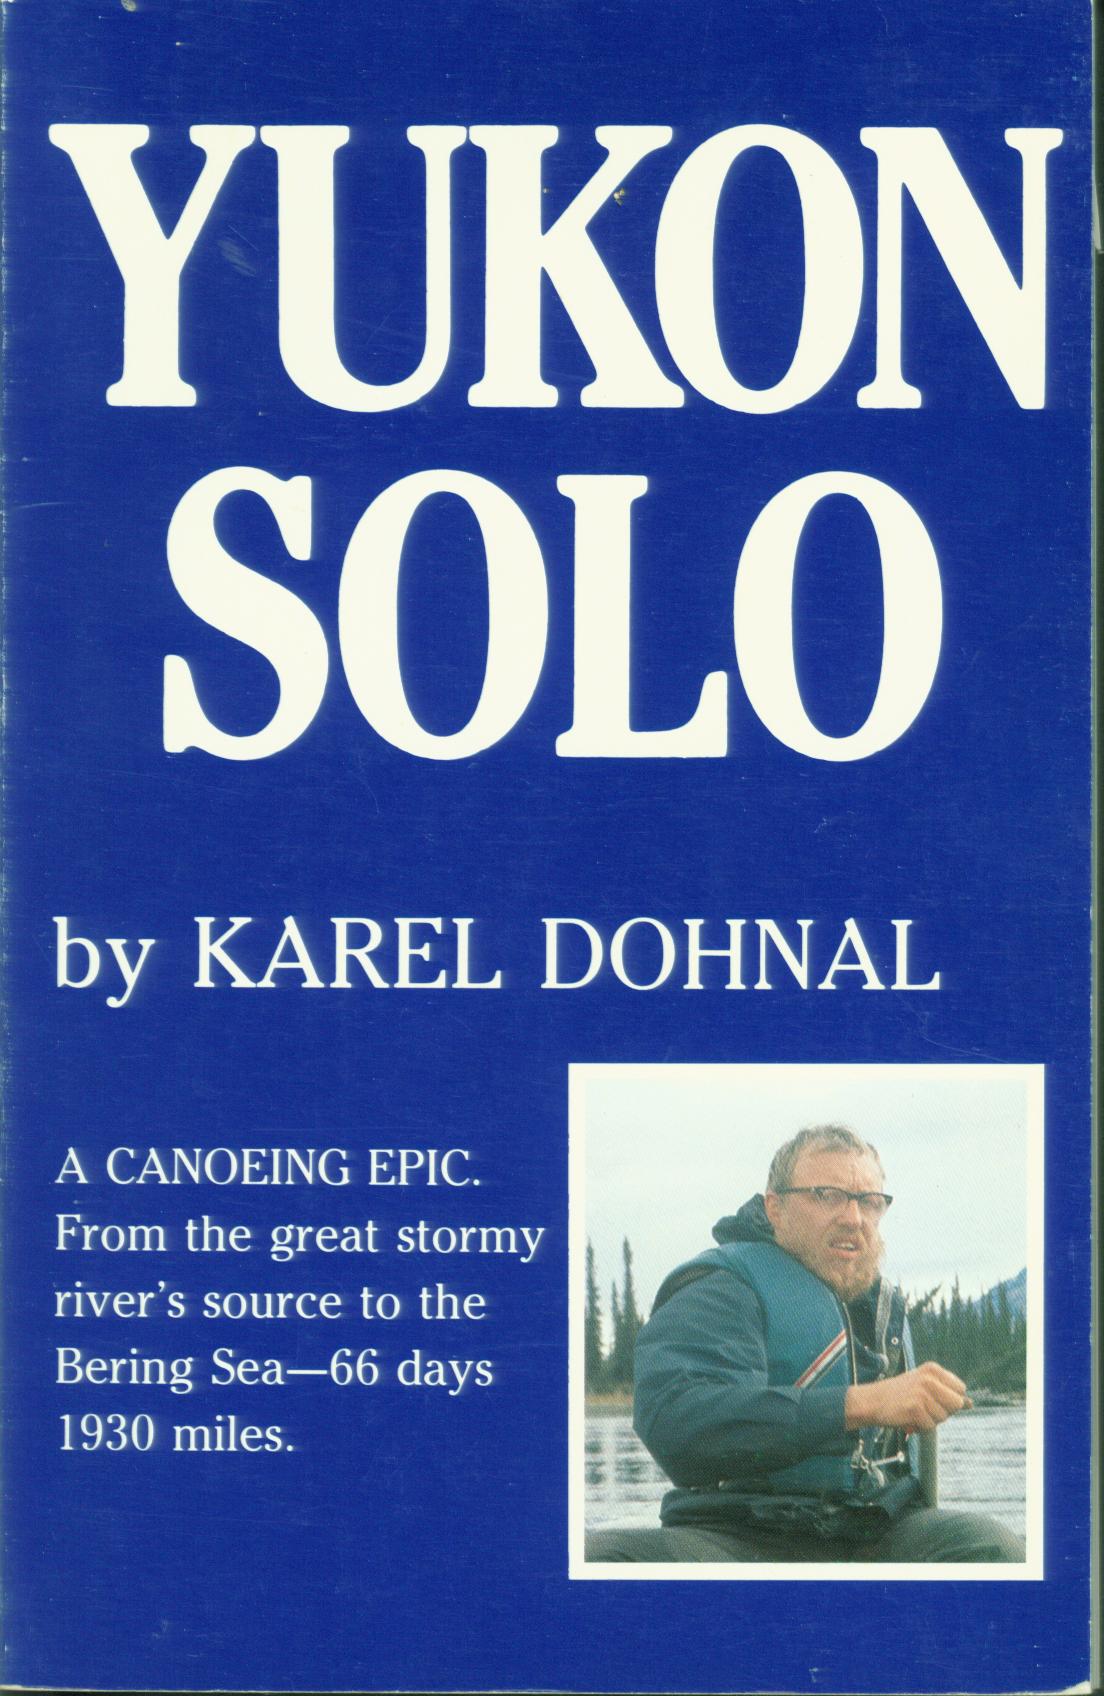 YUKON SOLO: a canoing epic from the great stormy river's source to the Bering Sea.